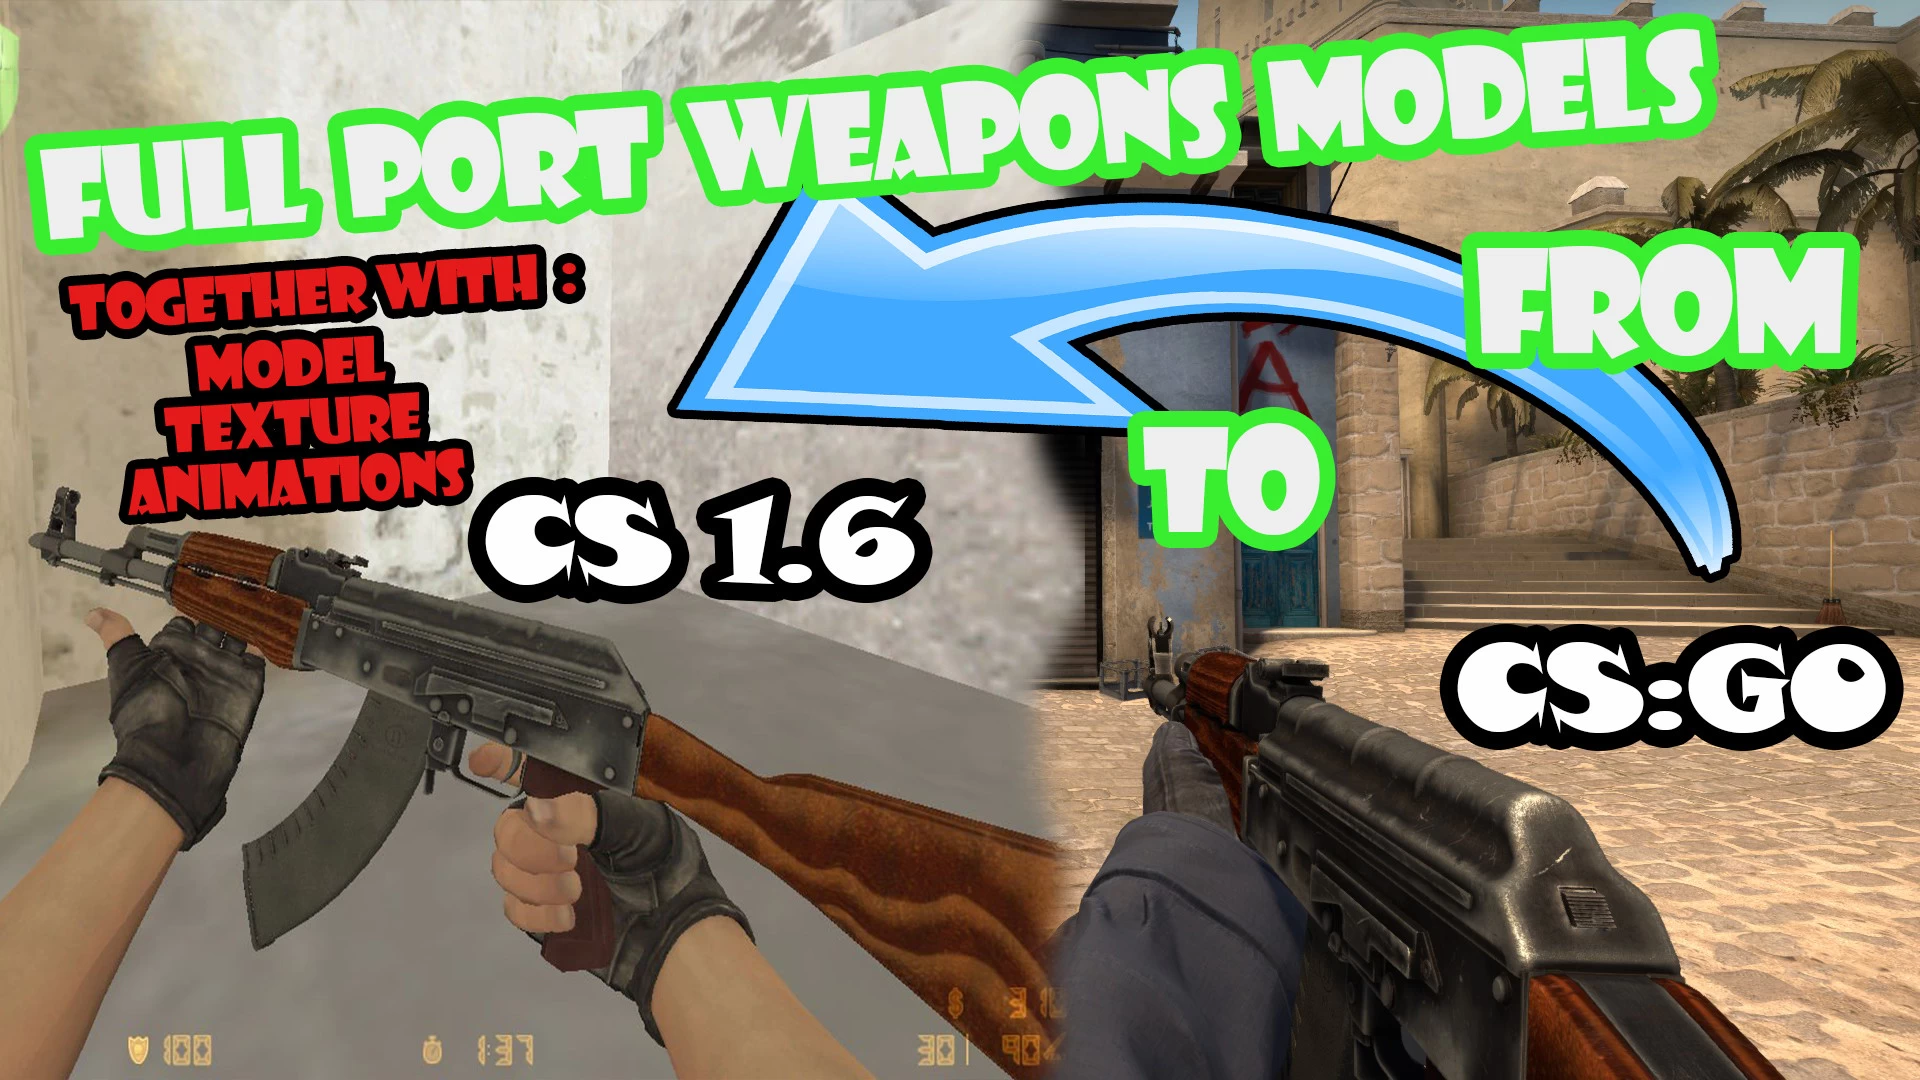 How To Port Weapons Models From Cs Go To Cs 1 6 Counter Strike 1 6 Tutorials - roblox how to get counter strike weapons